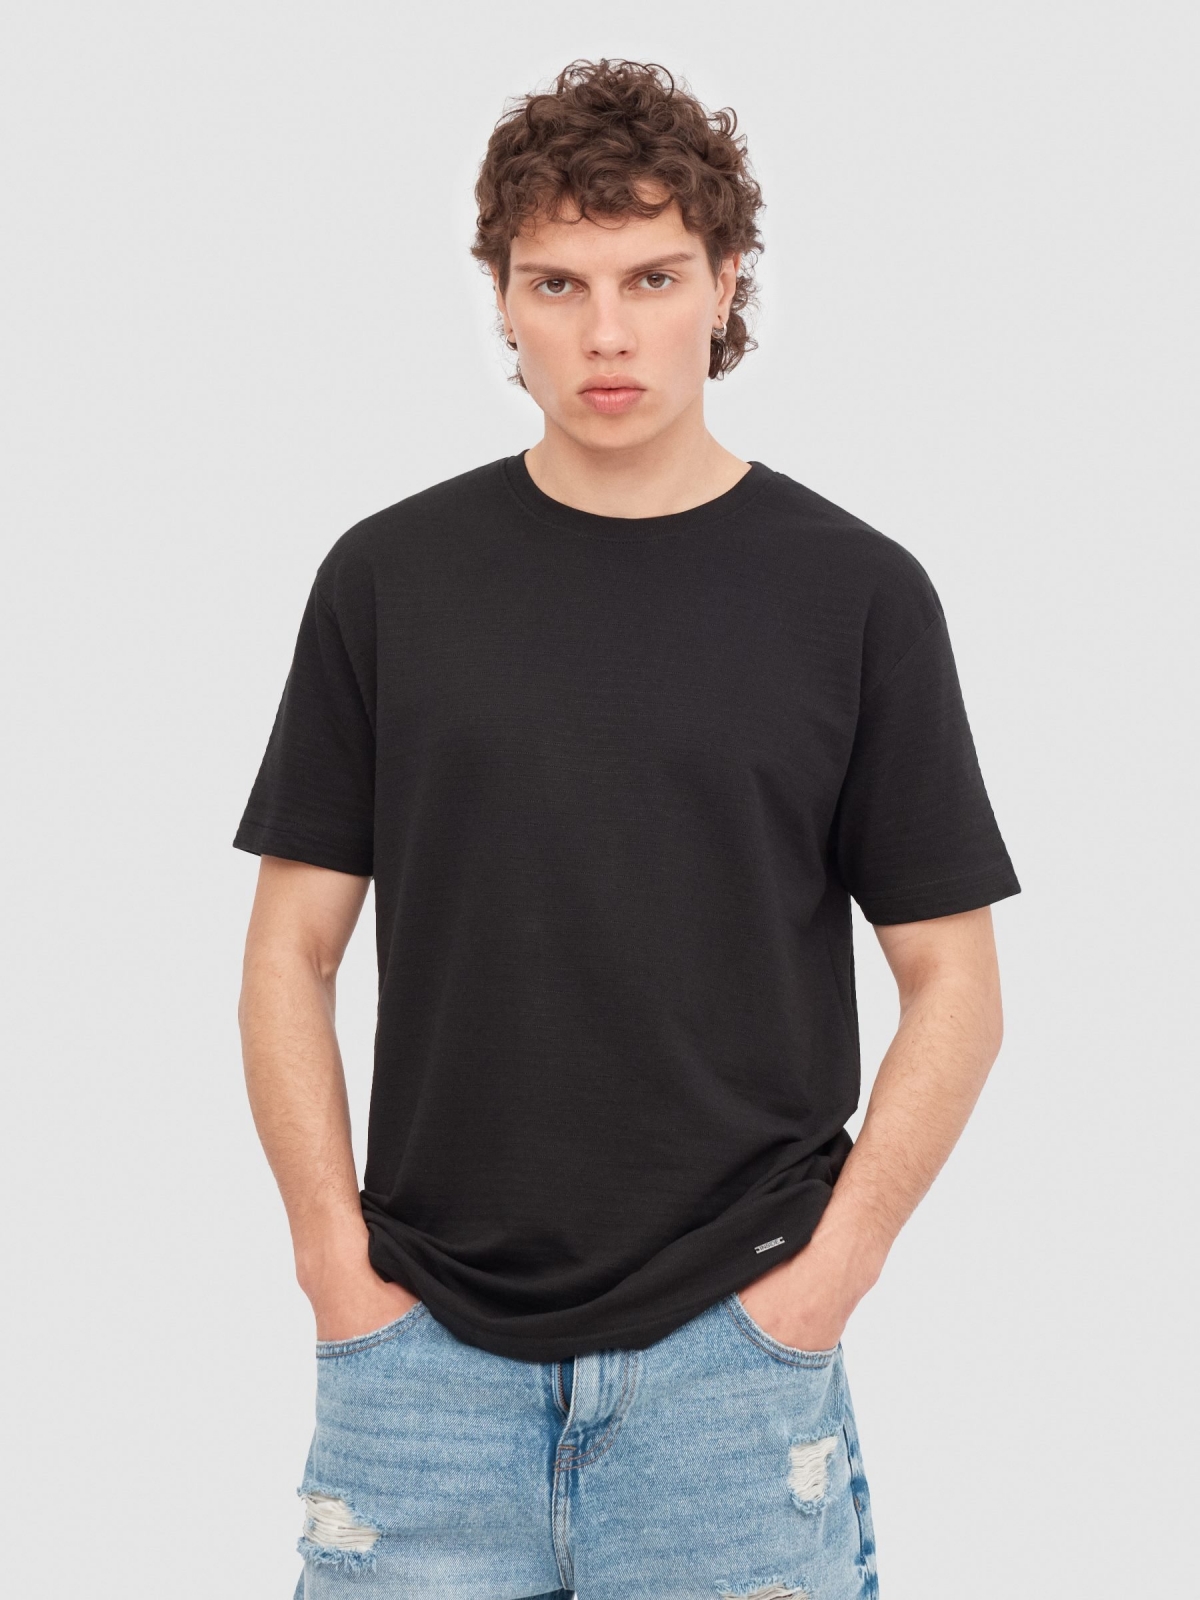 Striped T-shirt black middle front view